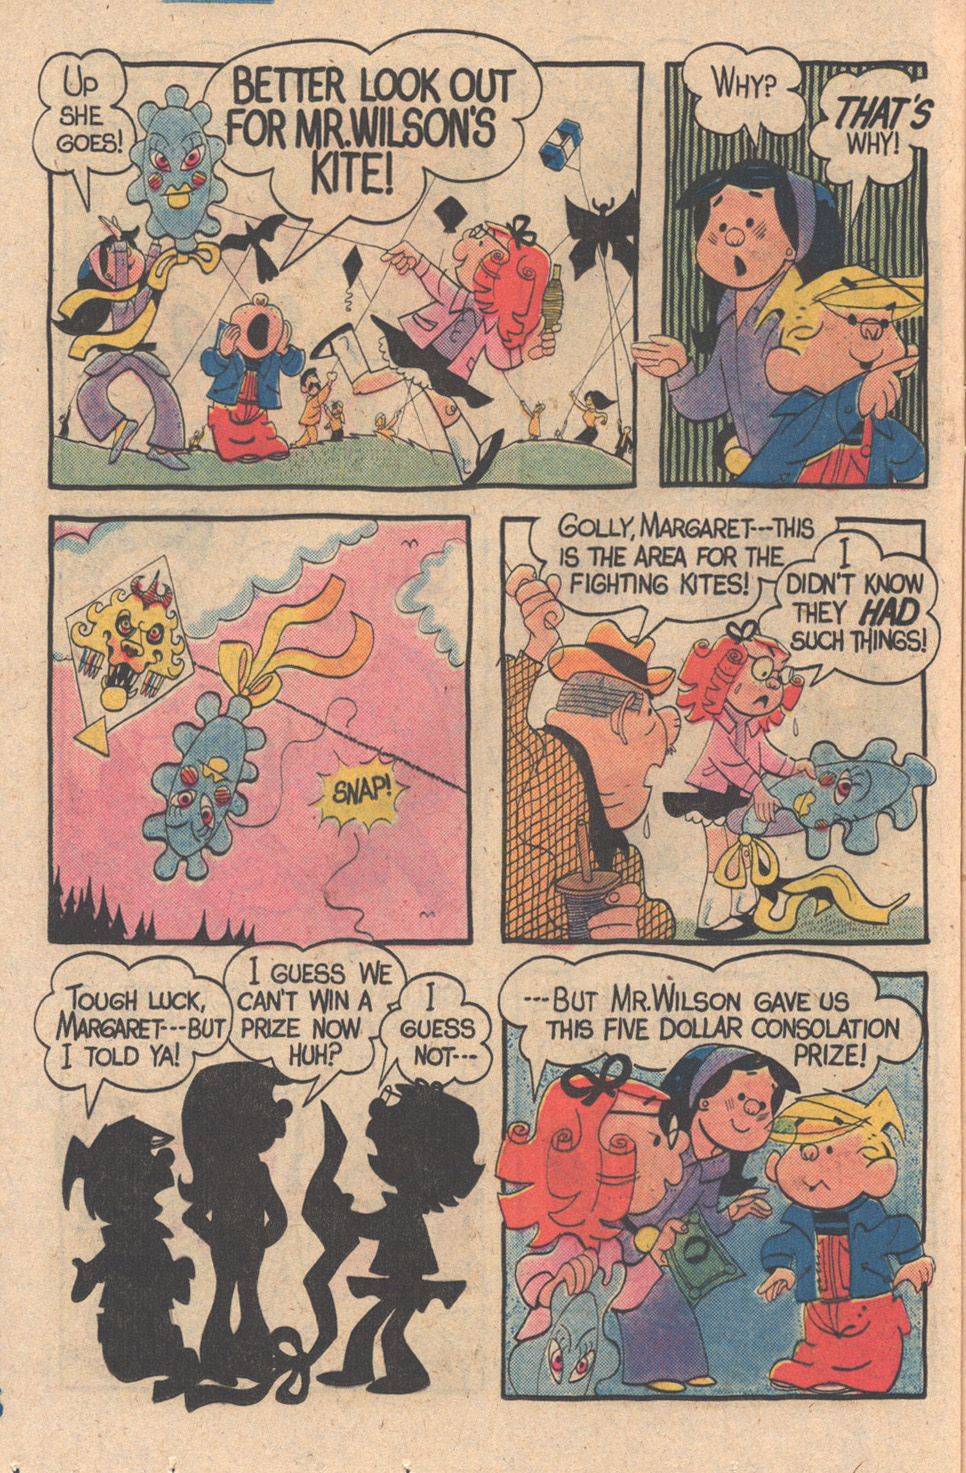 Dennis The Menace Issue 8 Viewcomic Reading Comics